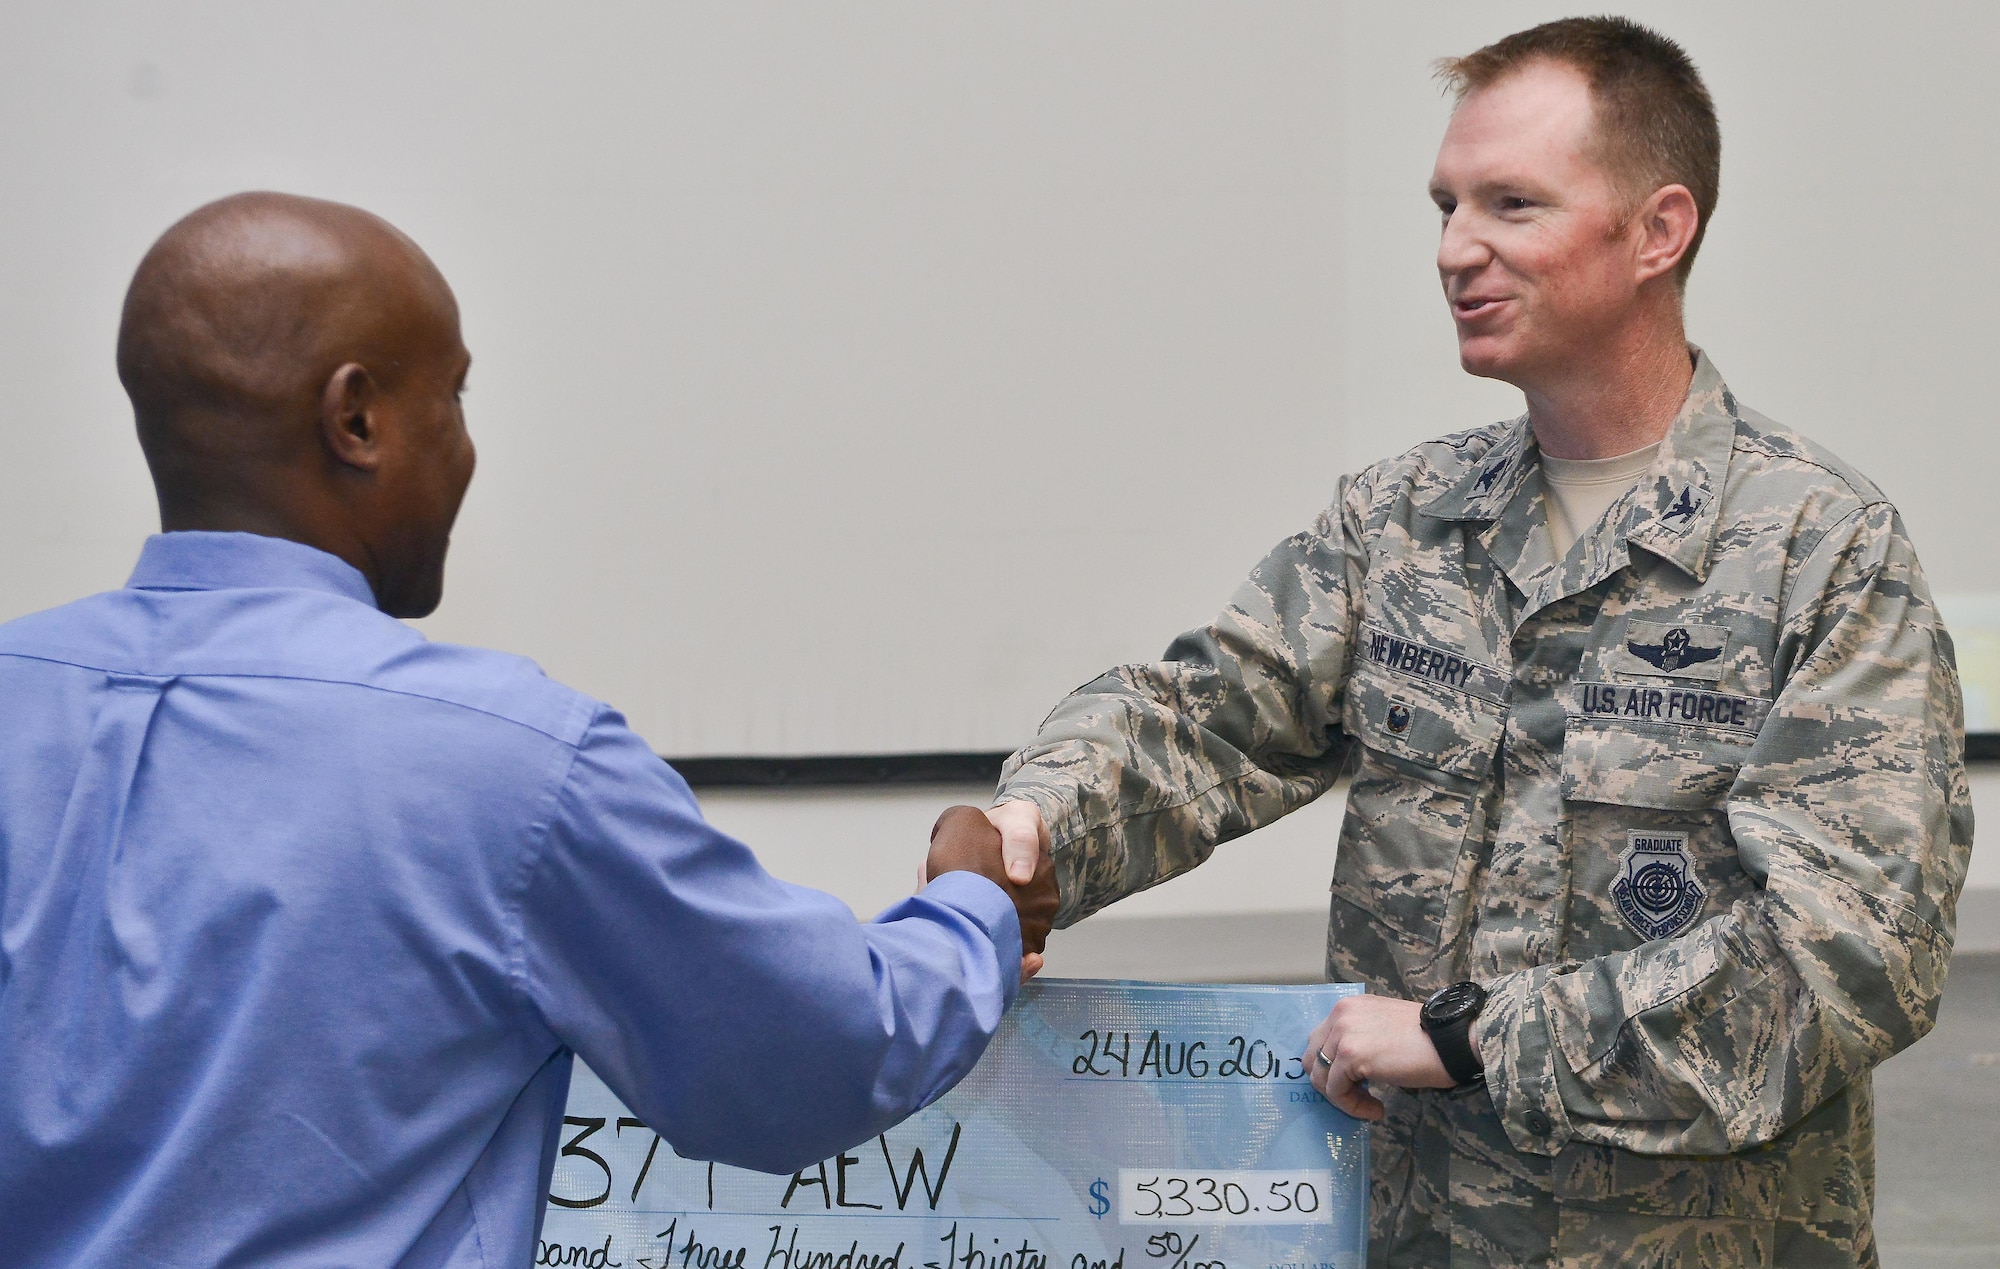 Chidley Lafontant, Combined Federal Campaign-Overseas manager, presents a check from 2014 CFC-O undesignated funds to Col. Stuart Newberry, 379th Air Expeditionary Wing vice commander, who received it on behalf of the 379th AEW August 27, 2015 at Al Udeid Air Base, Qatar. CFC gives military members the opportunity to contribute through donations for various charities. The campaign will begin September 21st and conclude November 21st. (U.S. Air Force photo/Staff Sgt. Alexandre Montes)